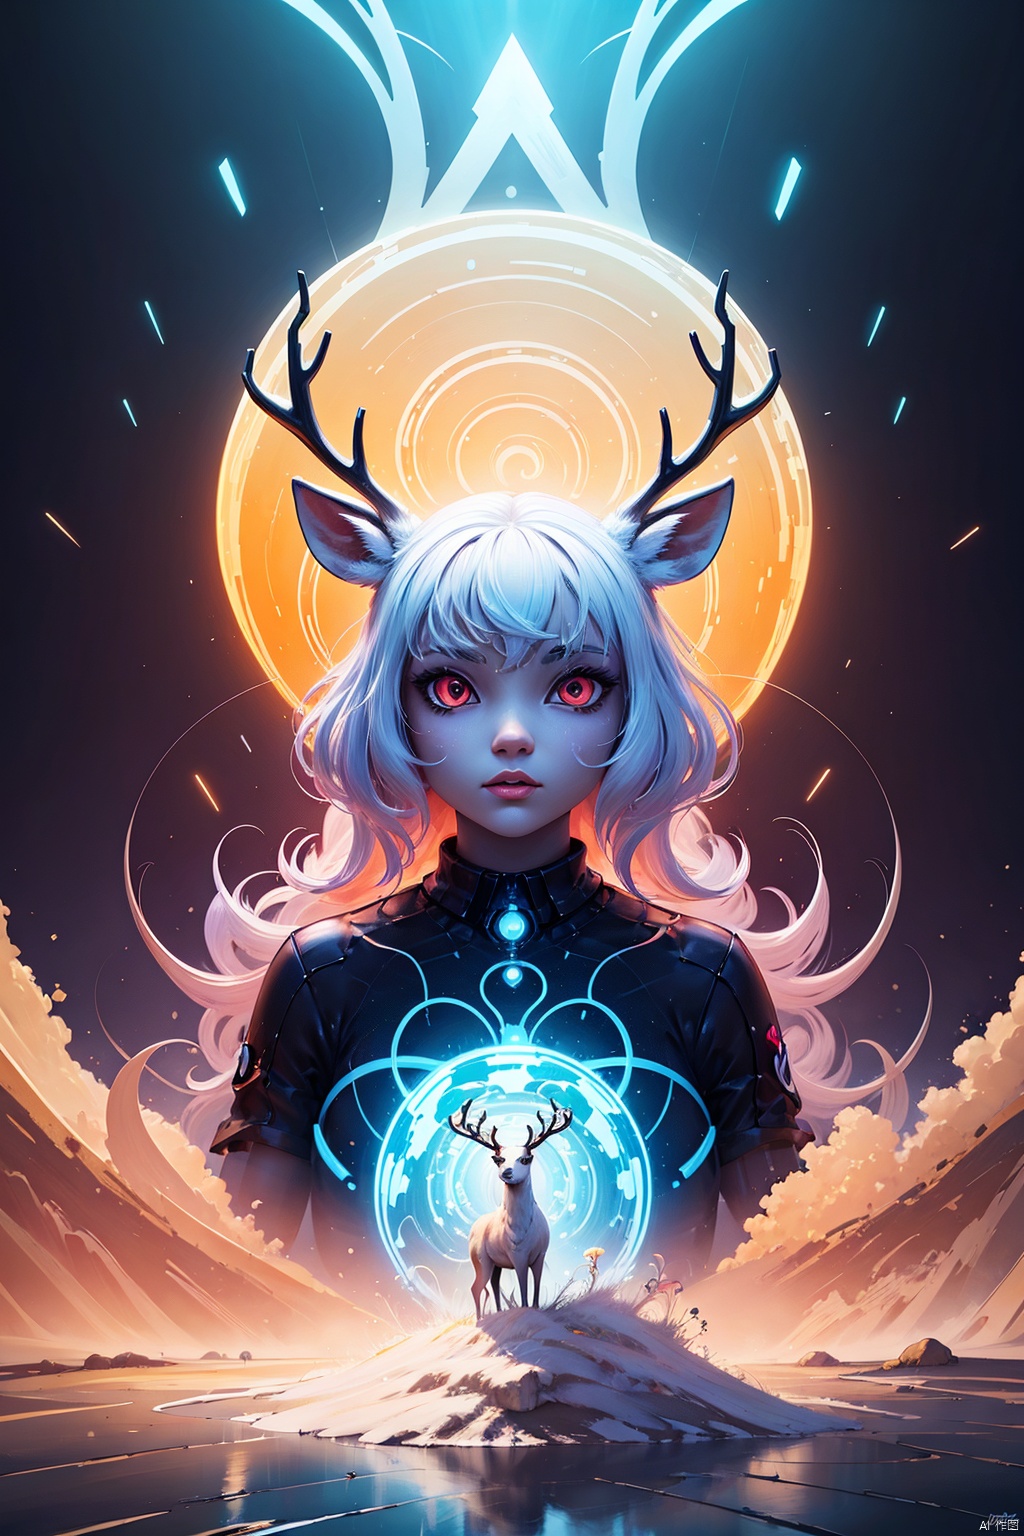 (Psychedelic painting of a deer standing in front of a colorful swirl), ((multiple antlers, stag, big head)), bright colors, thick lines, waves, multiple layers, foreground, perspective, fractal Thunder Dan Mumford , Dan Mumford and Alex Gray style, psychedelic surreal art, surreal psychedelic design, dream art style, illusion psychedelic art, infinite psychedelic waves, inspired by Cyril Rolando Rolando), realistic ripple structure, psychedelic art style, psychedelic art, psychedelic illustration